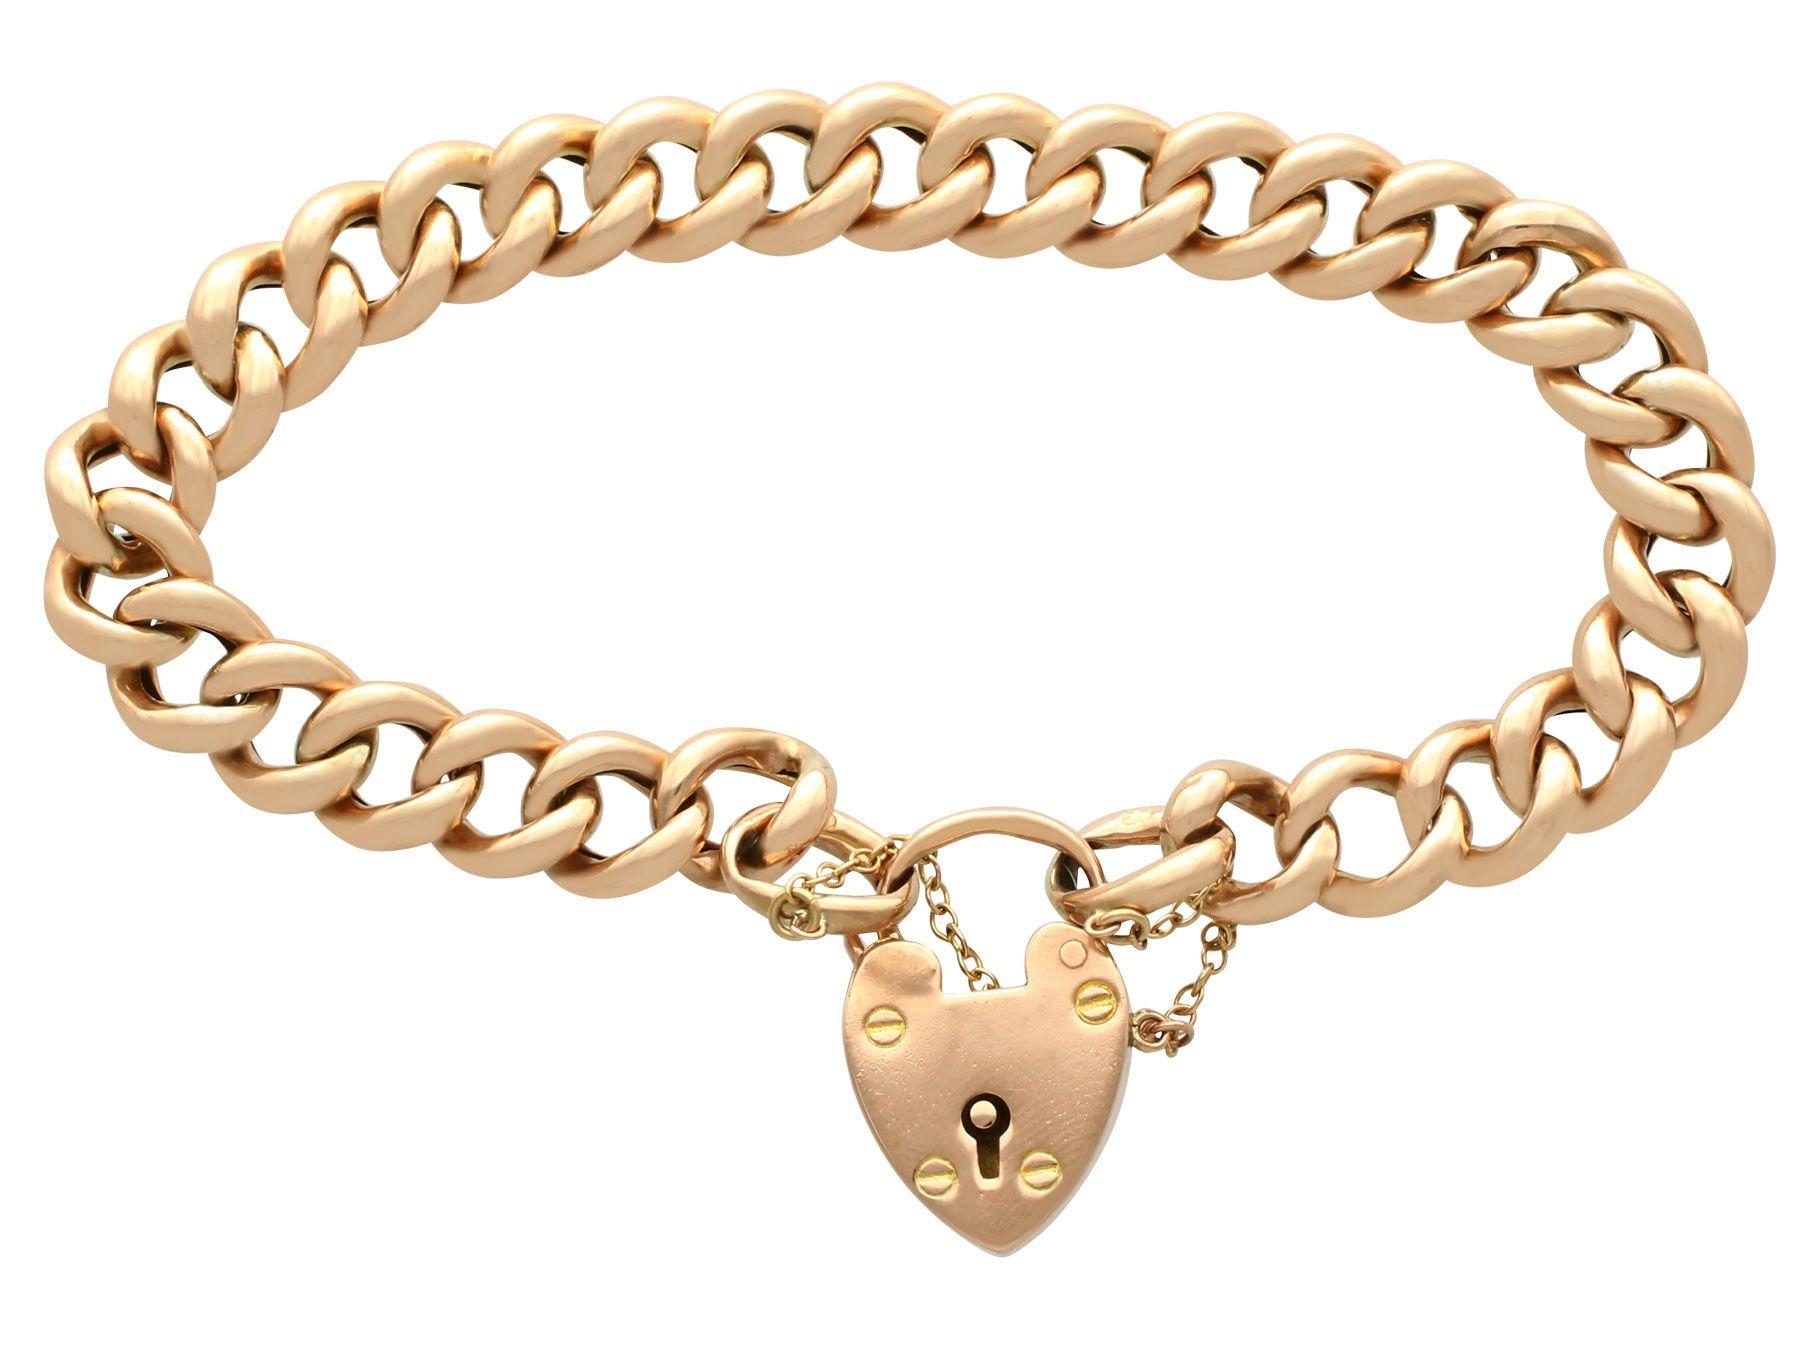 An impressive antique 9 karat yellow gold curb link bracelet with heart shaped padlock clasp; part of our diverse antique jewelry and estate jewelry collections.

This fine and impressive antique bracelet has been crafted in 9k yellow gold.

The